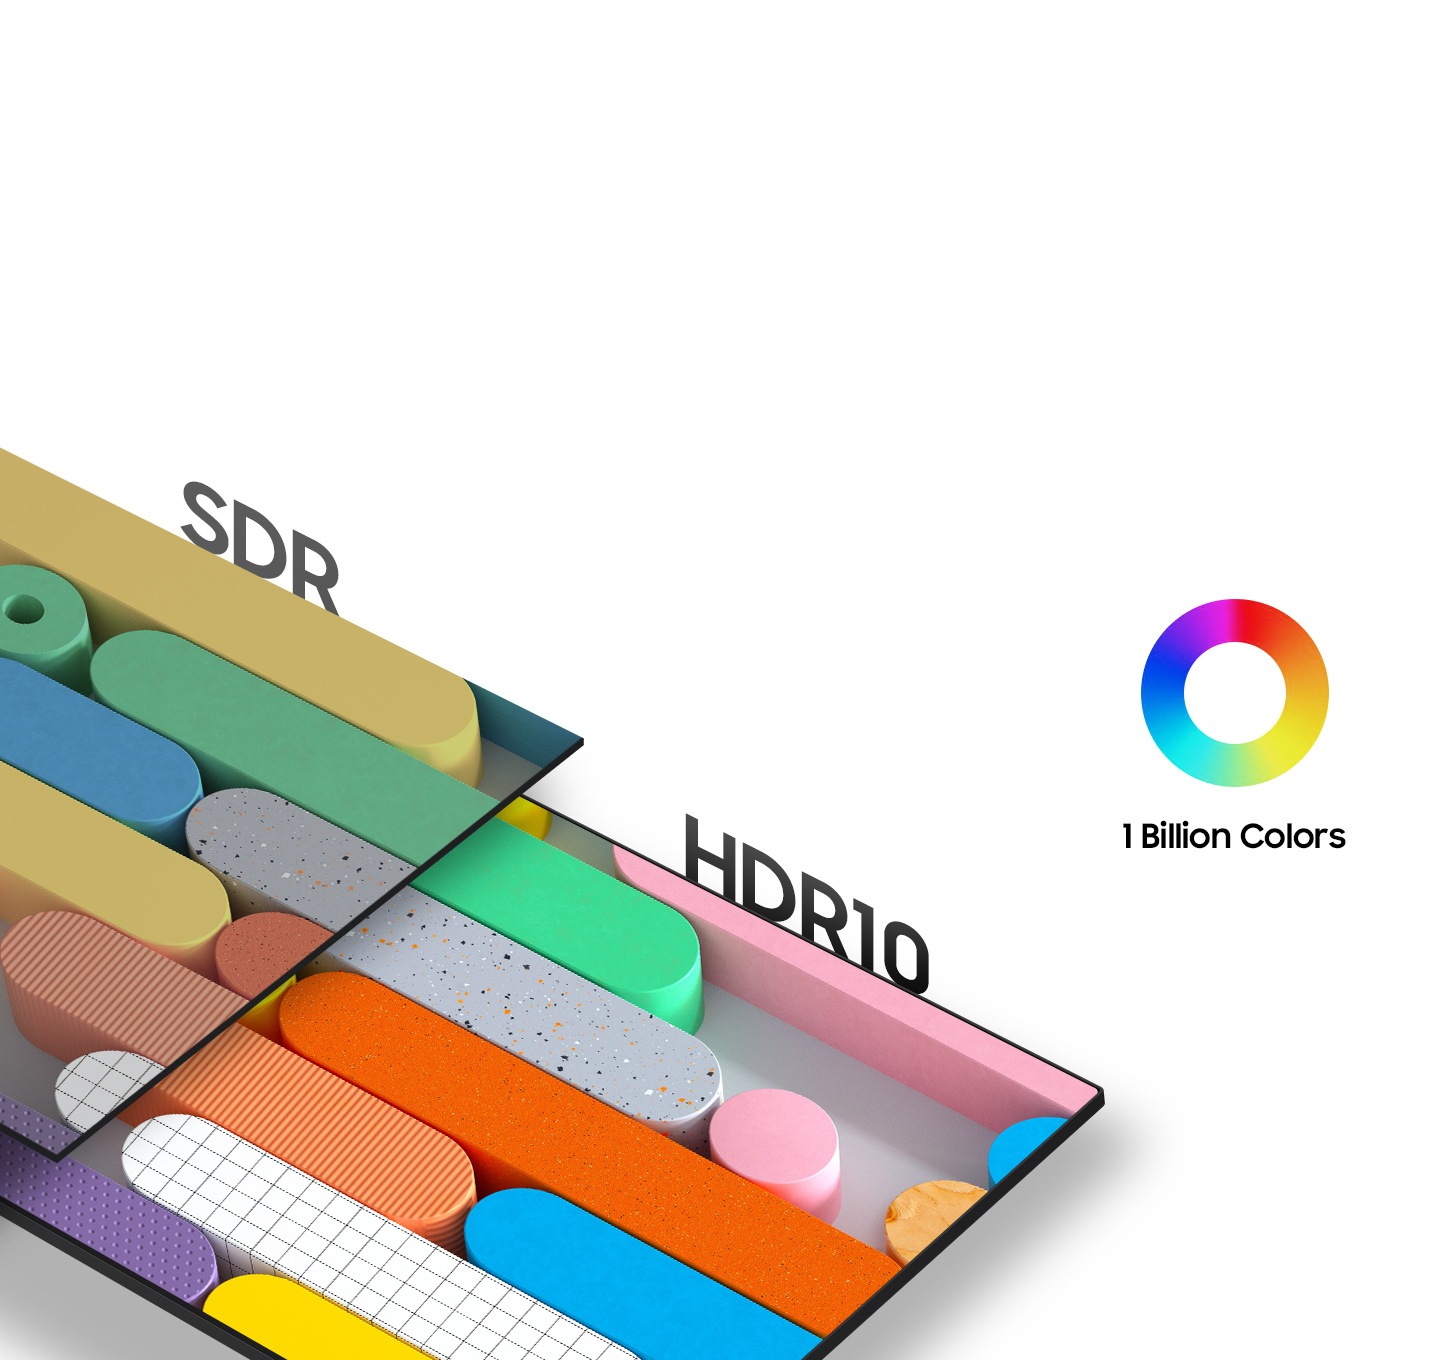 A brightly colored set of shapes is split into two squares. The left side shows SDR while the right side shows HDR10 and its enhanced color benefits.